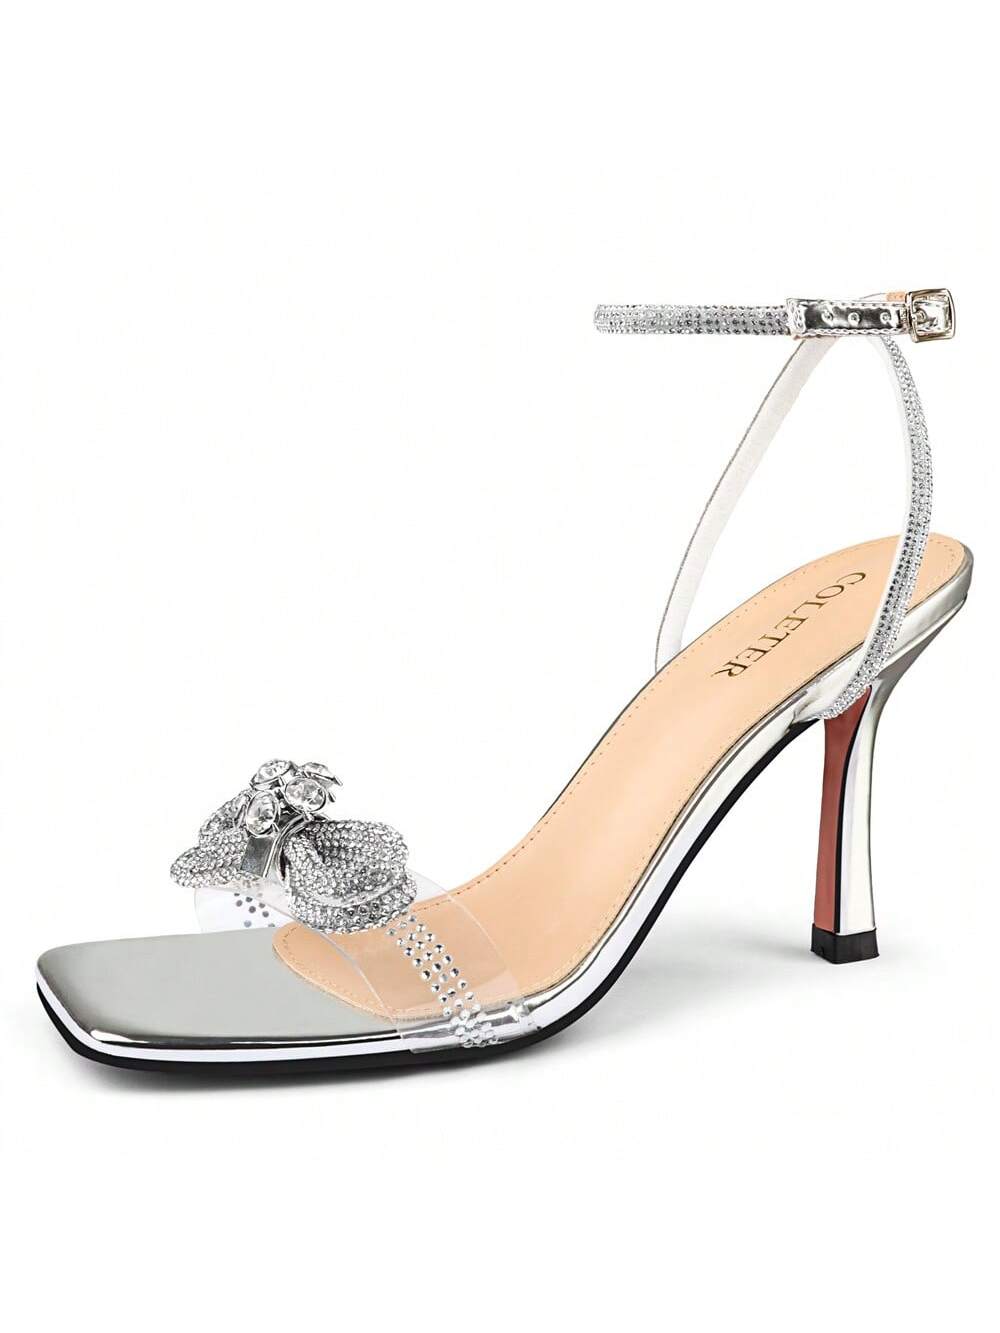 COLETER Womens Clear Rhinestones Bow Heels Sandals Slingback Lace Up Stilettos Square Toe Wedding Dress Shoes-Silver-1